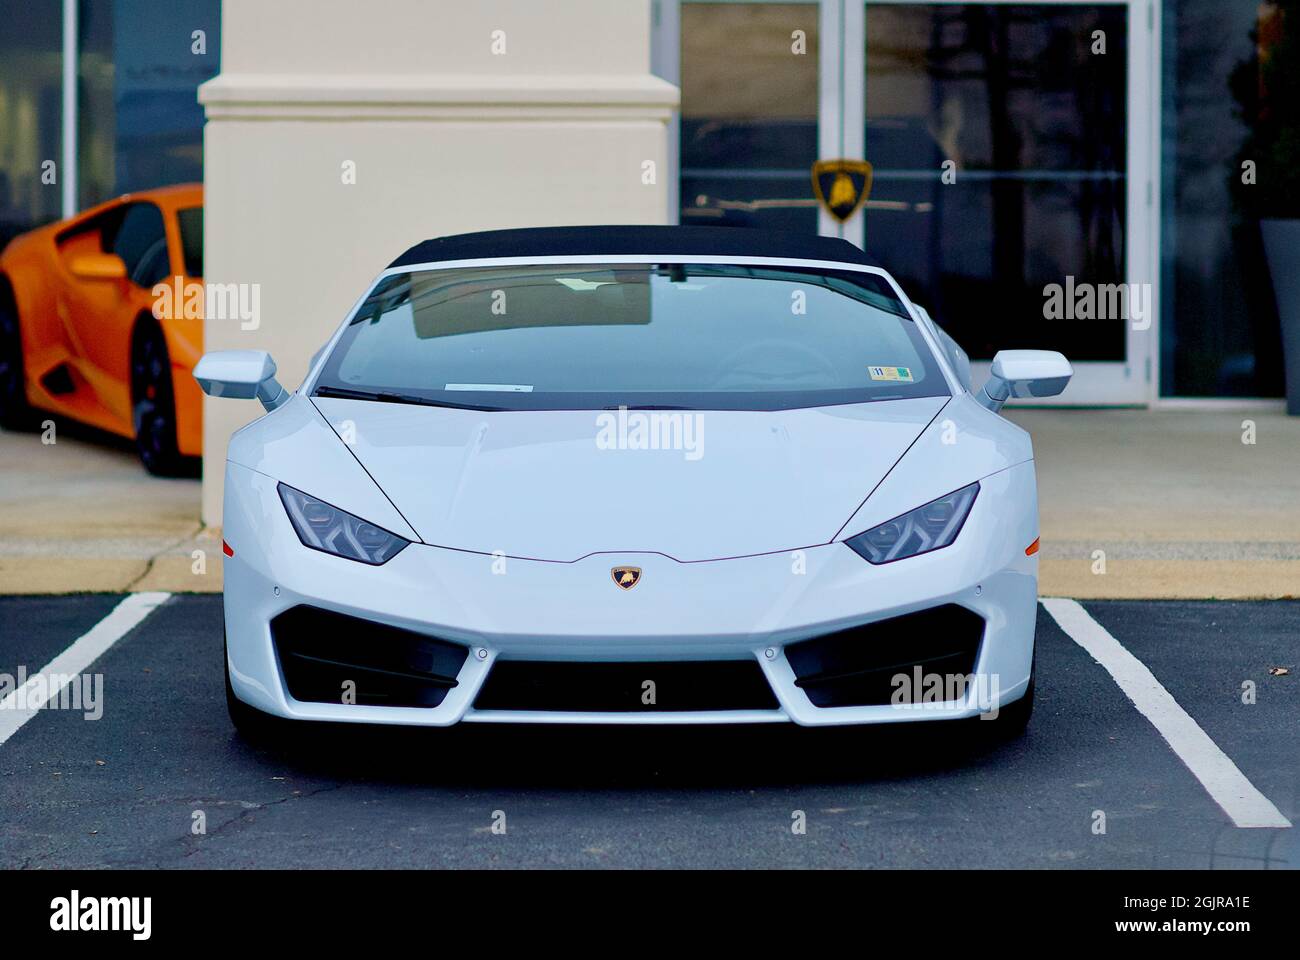 Sterling, Virginia, USA - December 9, 2018: Close-up of a white Lamborghini luxury sports car parked at the Lamborghini Sterling car dealership. Stock Photo